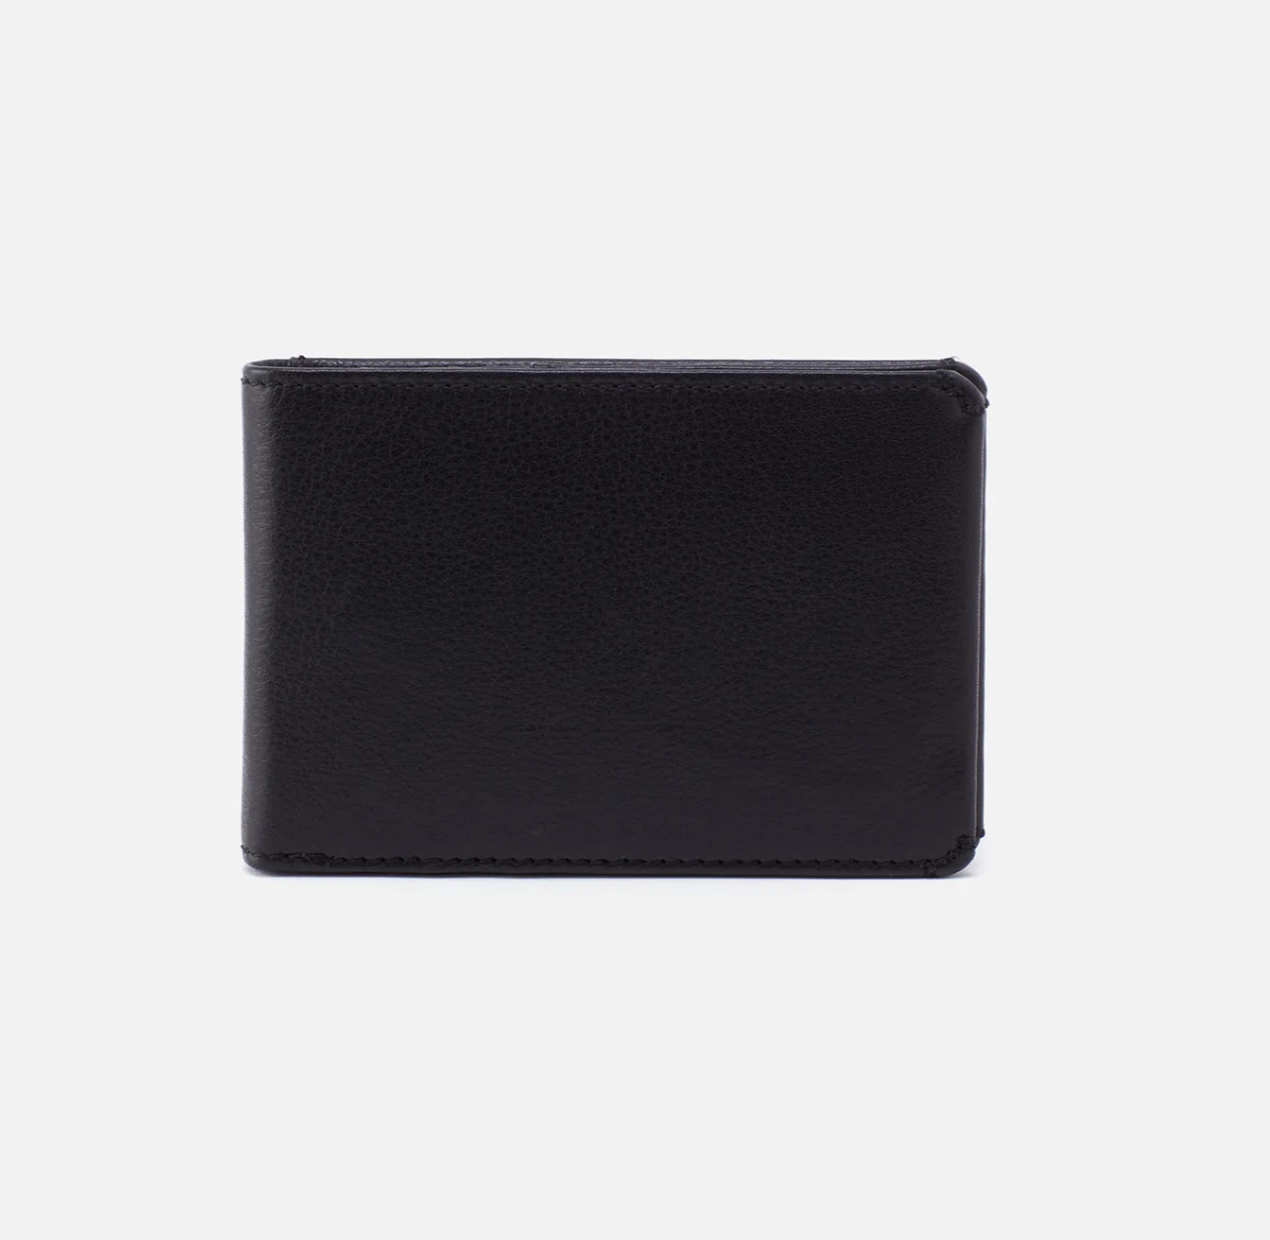 The Leather Men's Bifold Wallet in black has a sleek design and interior organization for cards and cash. Find it at the Painted Cottage in Edgewater, MD